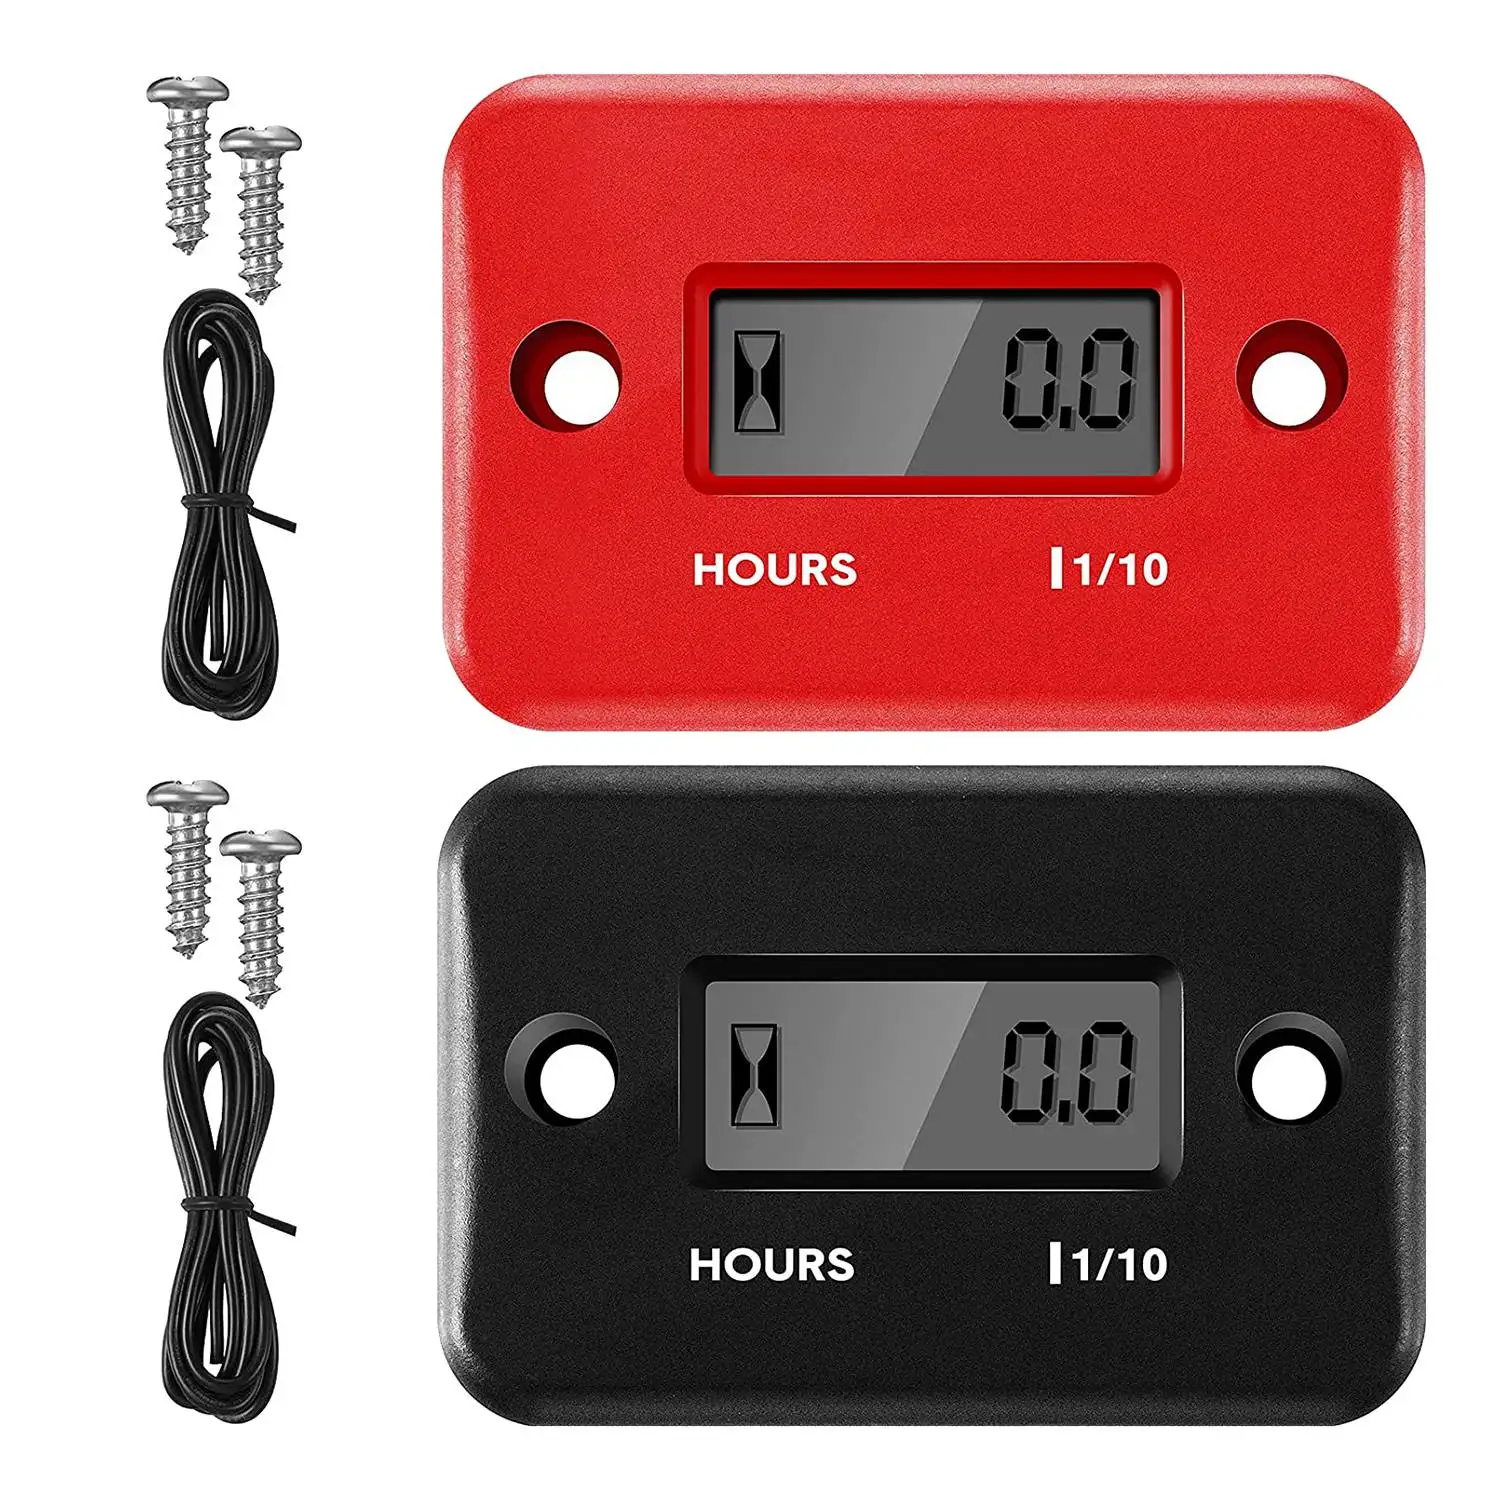 

2 Pieces Inductive Hour Meter for Gas Engine Lawn Mower Dirt Bike Motorcycle Motocross Snowmobile Marine (Black Red)